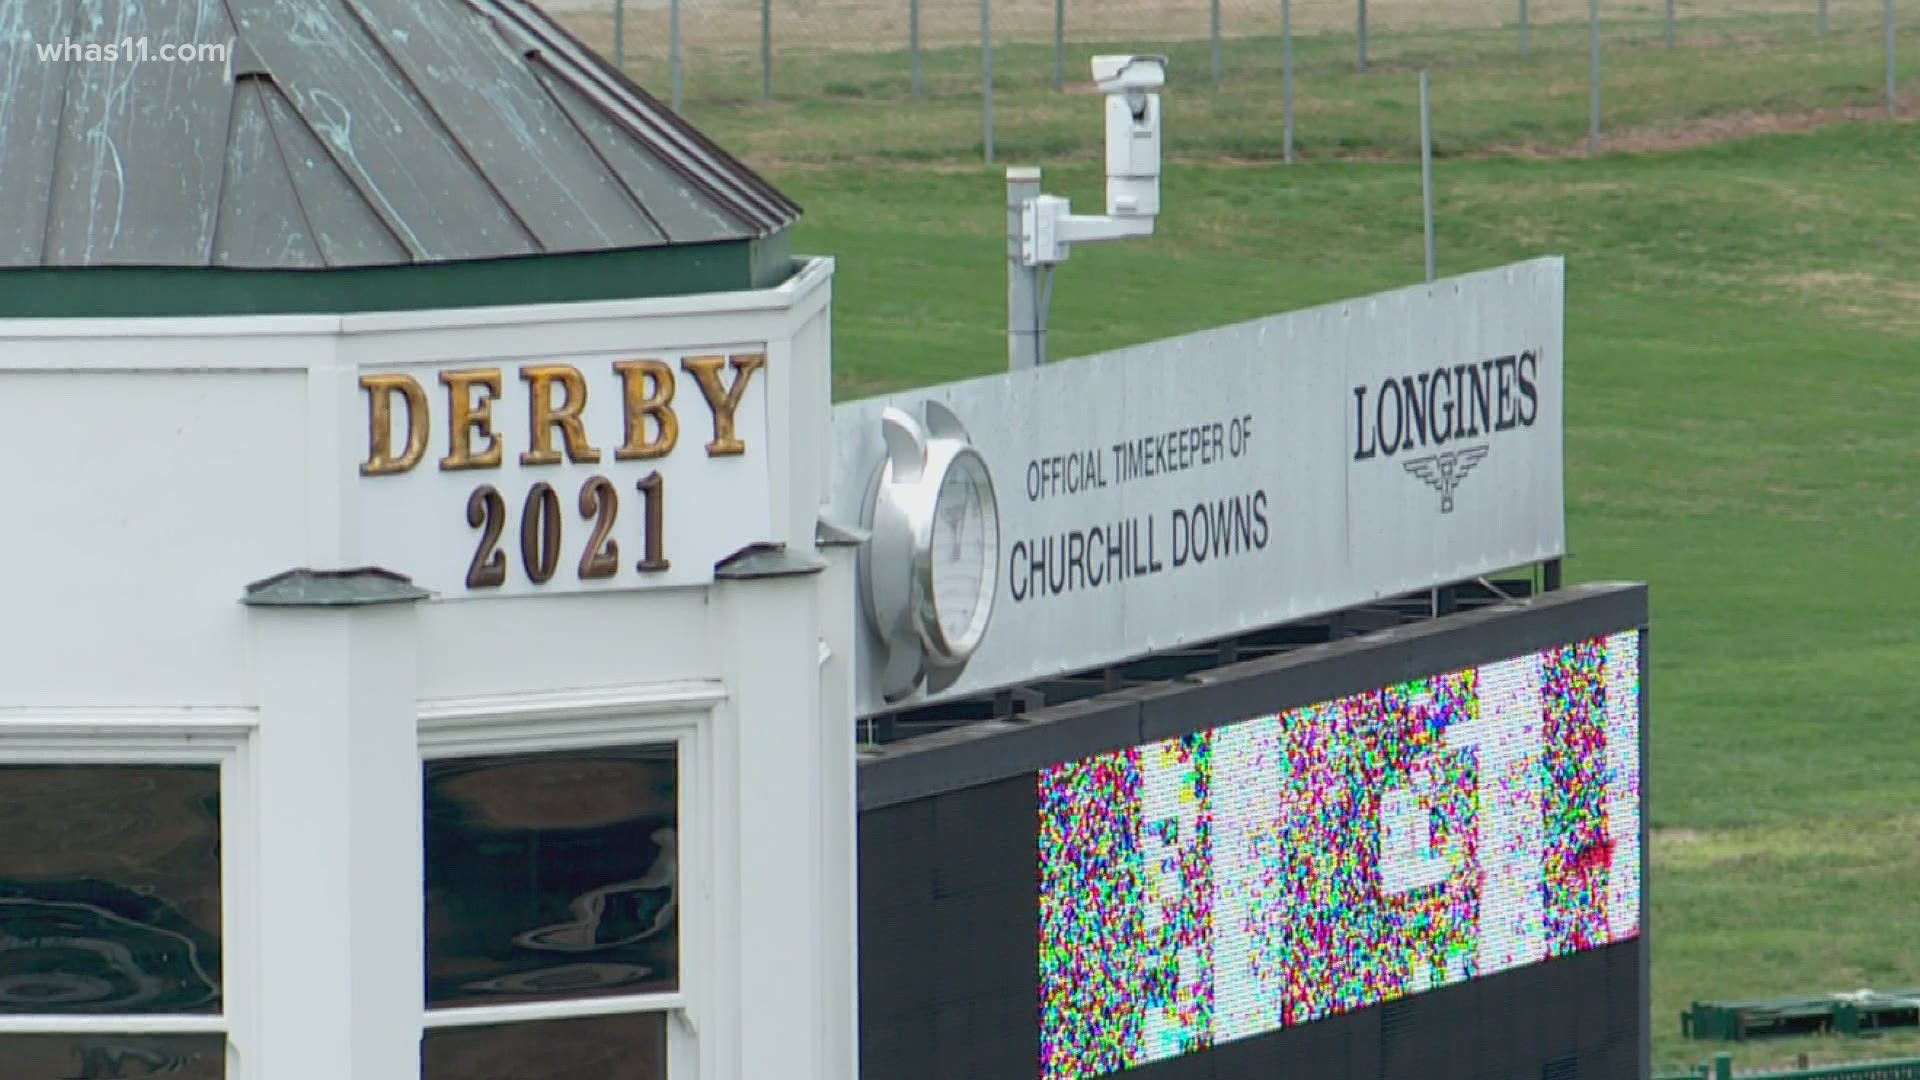 This year's race will be a smaller event, capping attendance at 40-50% at Churchill Downs.